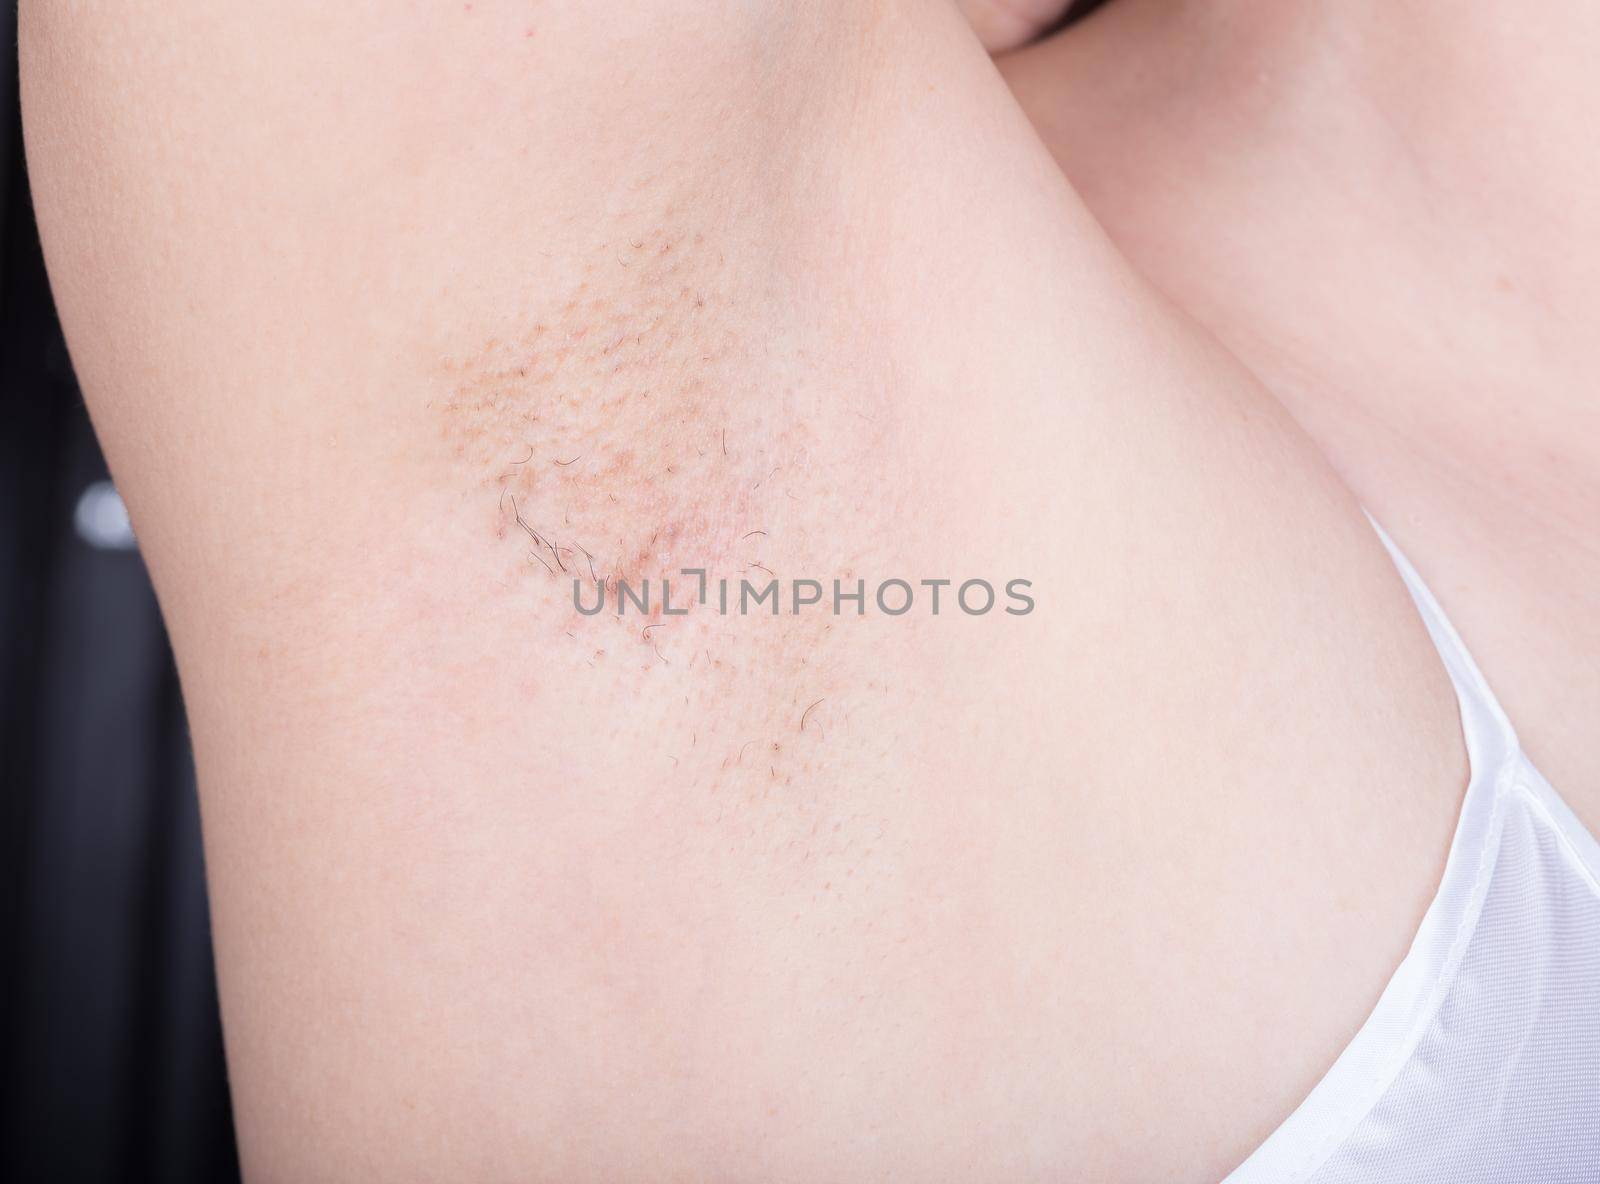 armpit of woman with grown hair